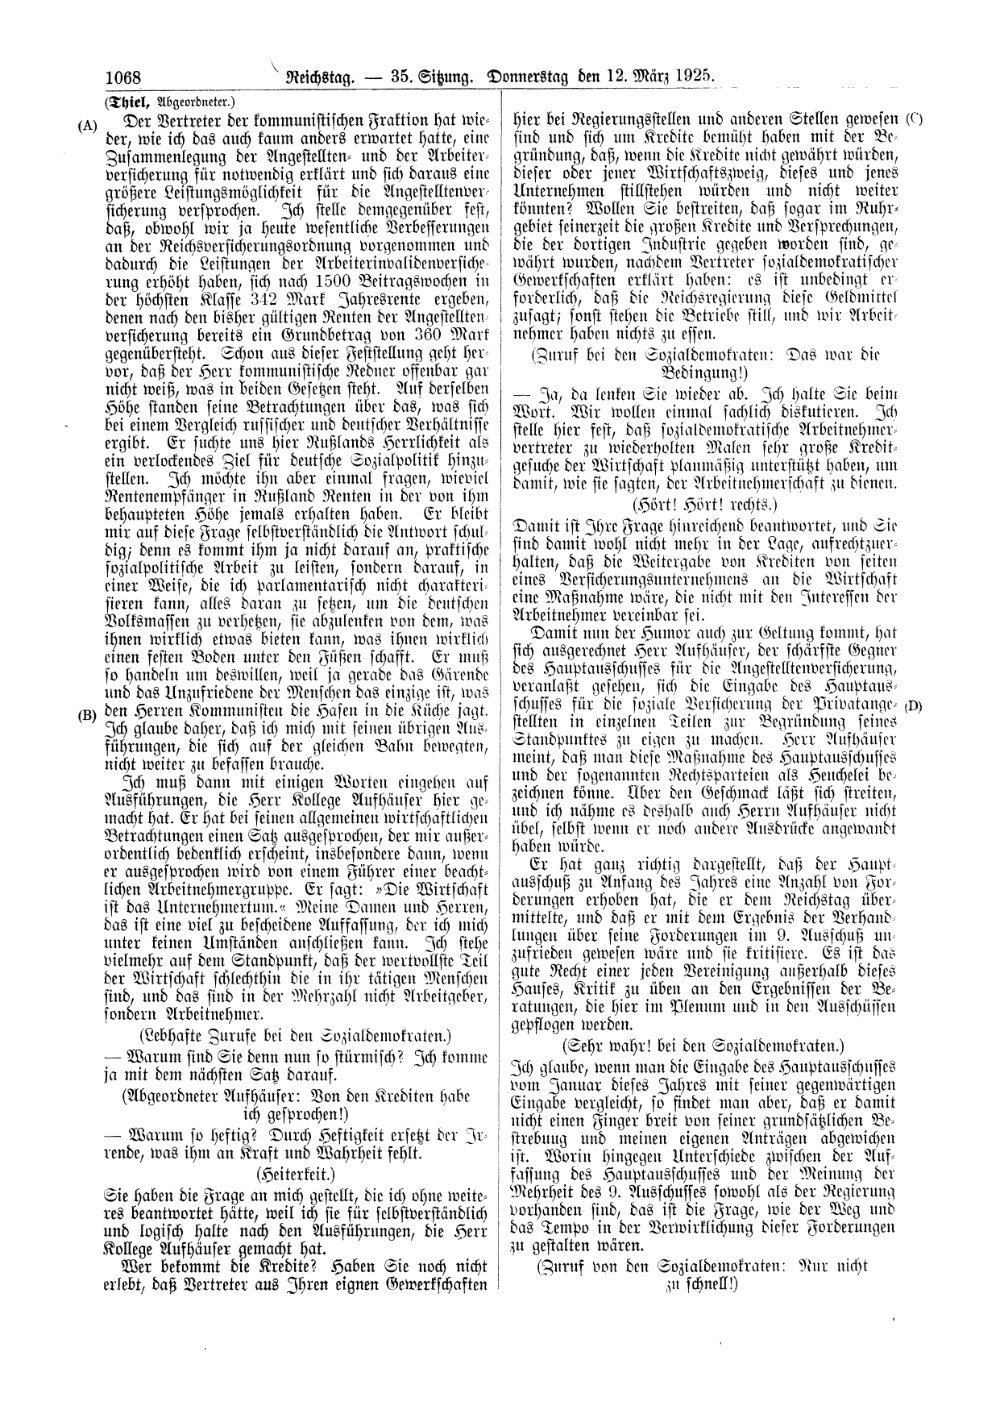 Scan of page 1068